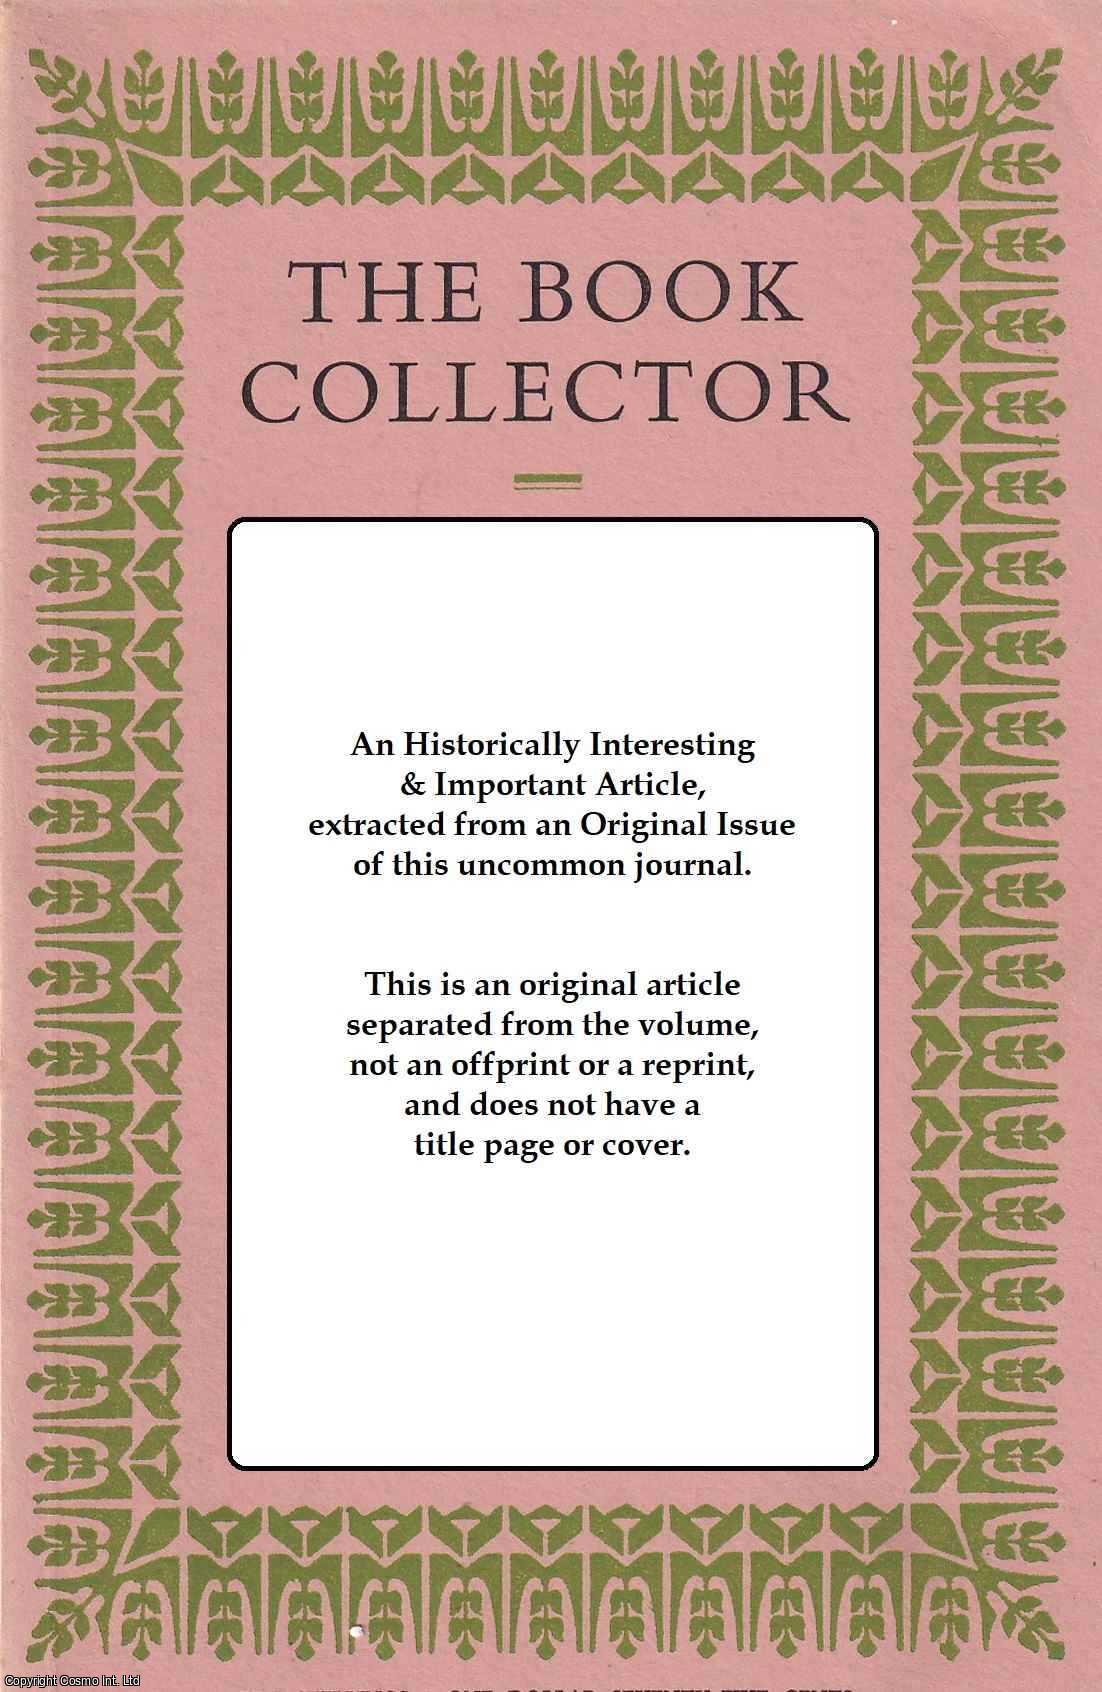 Philip Robinson - Recollections of Moving a Library or, How The Phillipps Collection was Brought to London. This is an original article separated from an issue of The Book Collector journal, 1986.